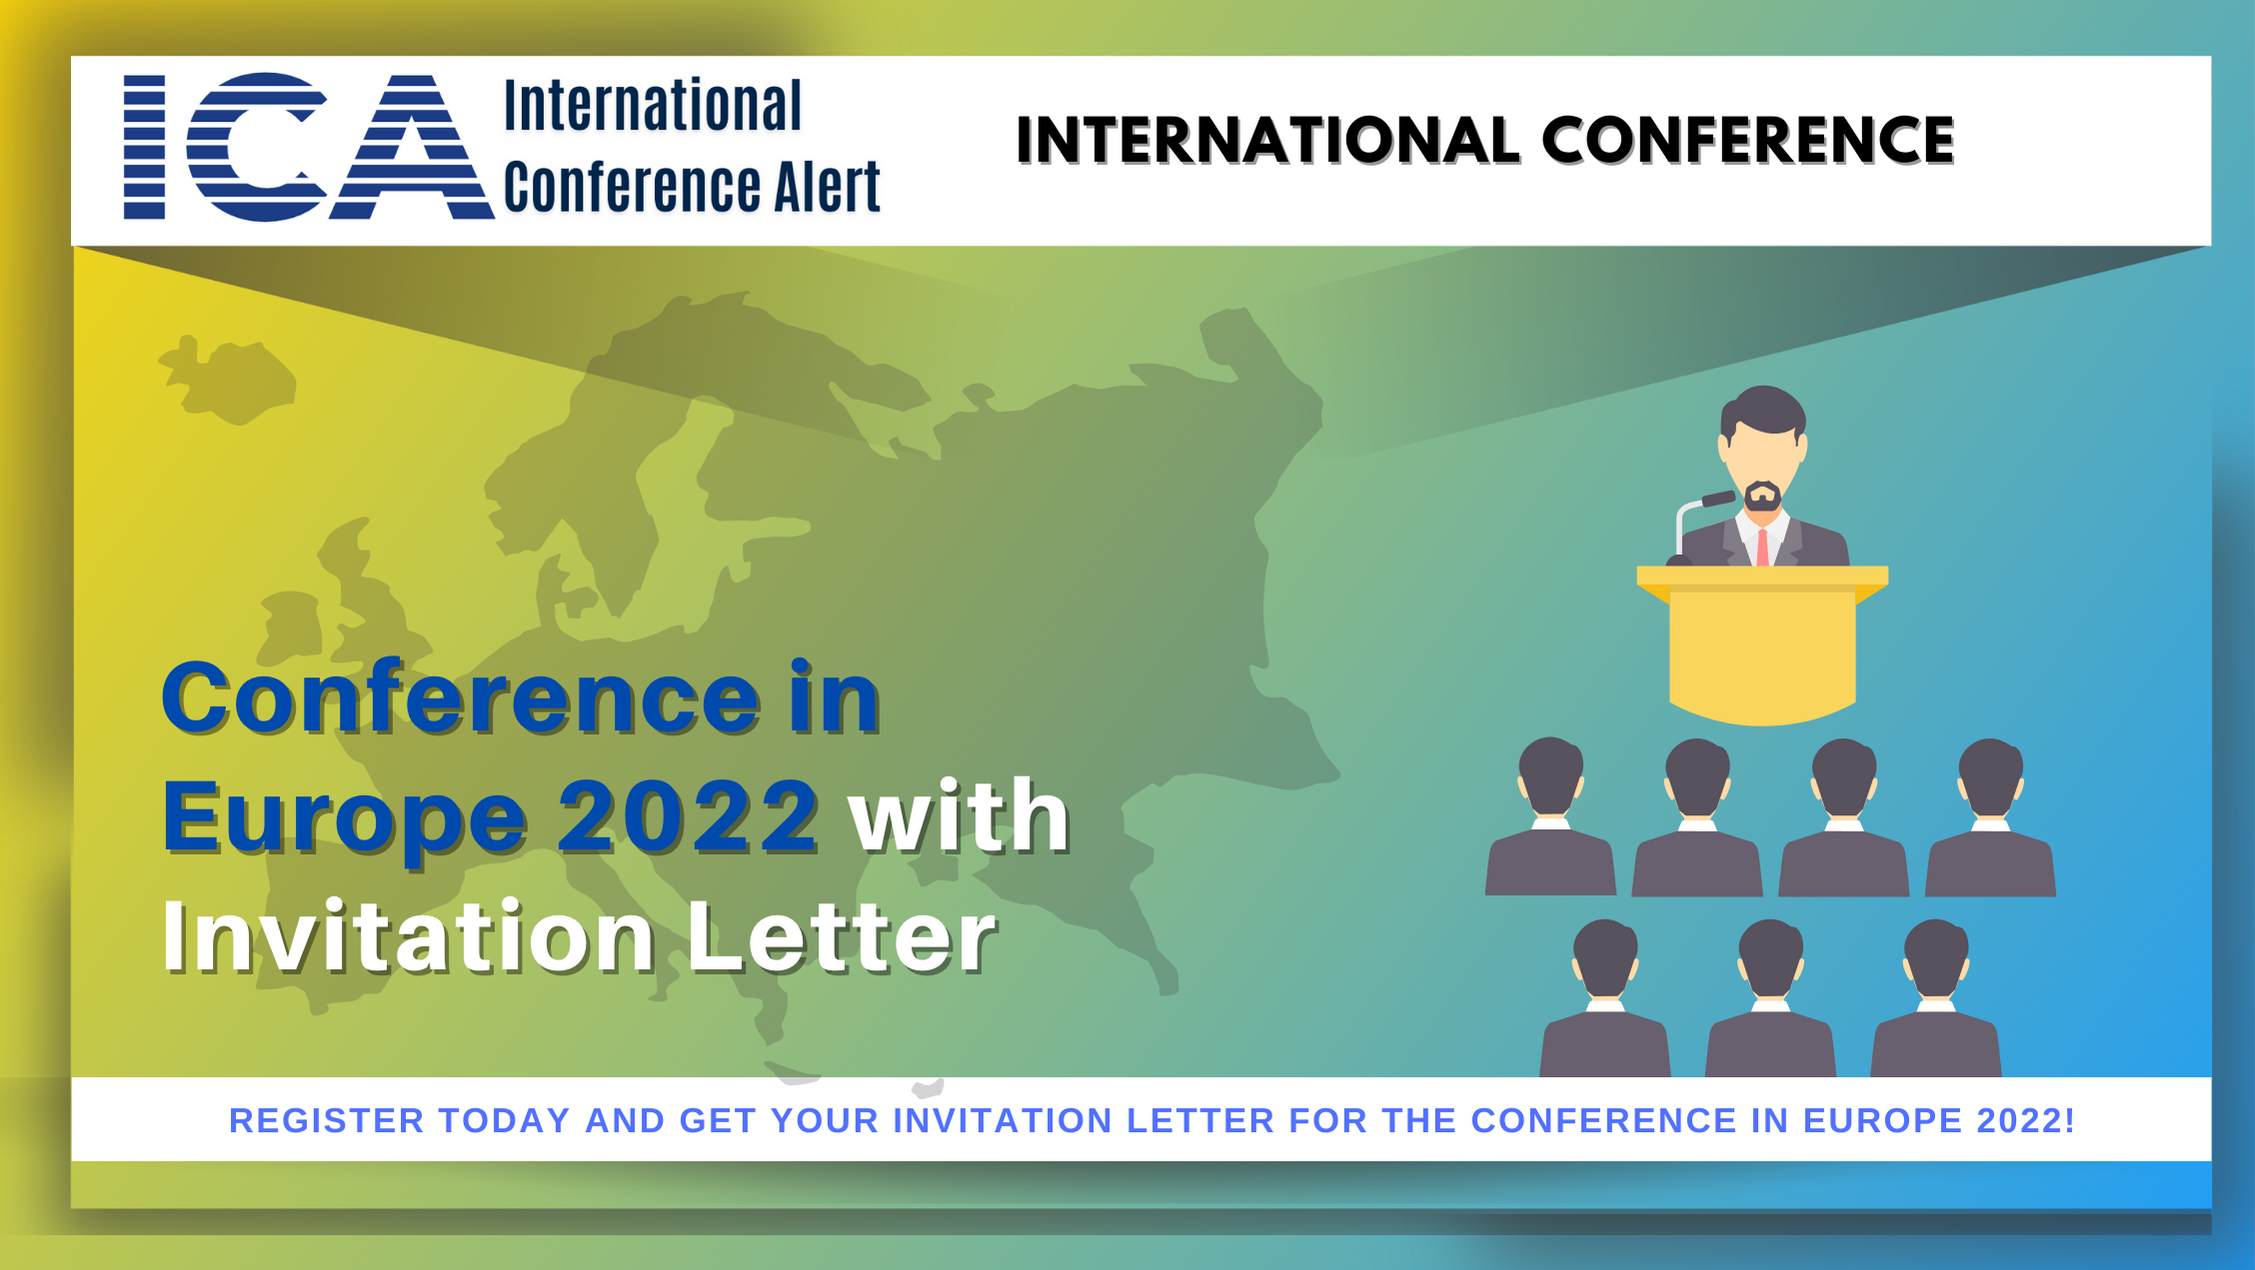 Conference in Europe 2022 with Invitation Letter